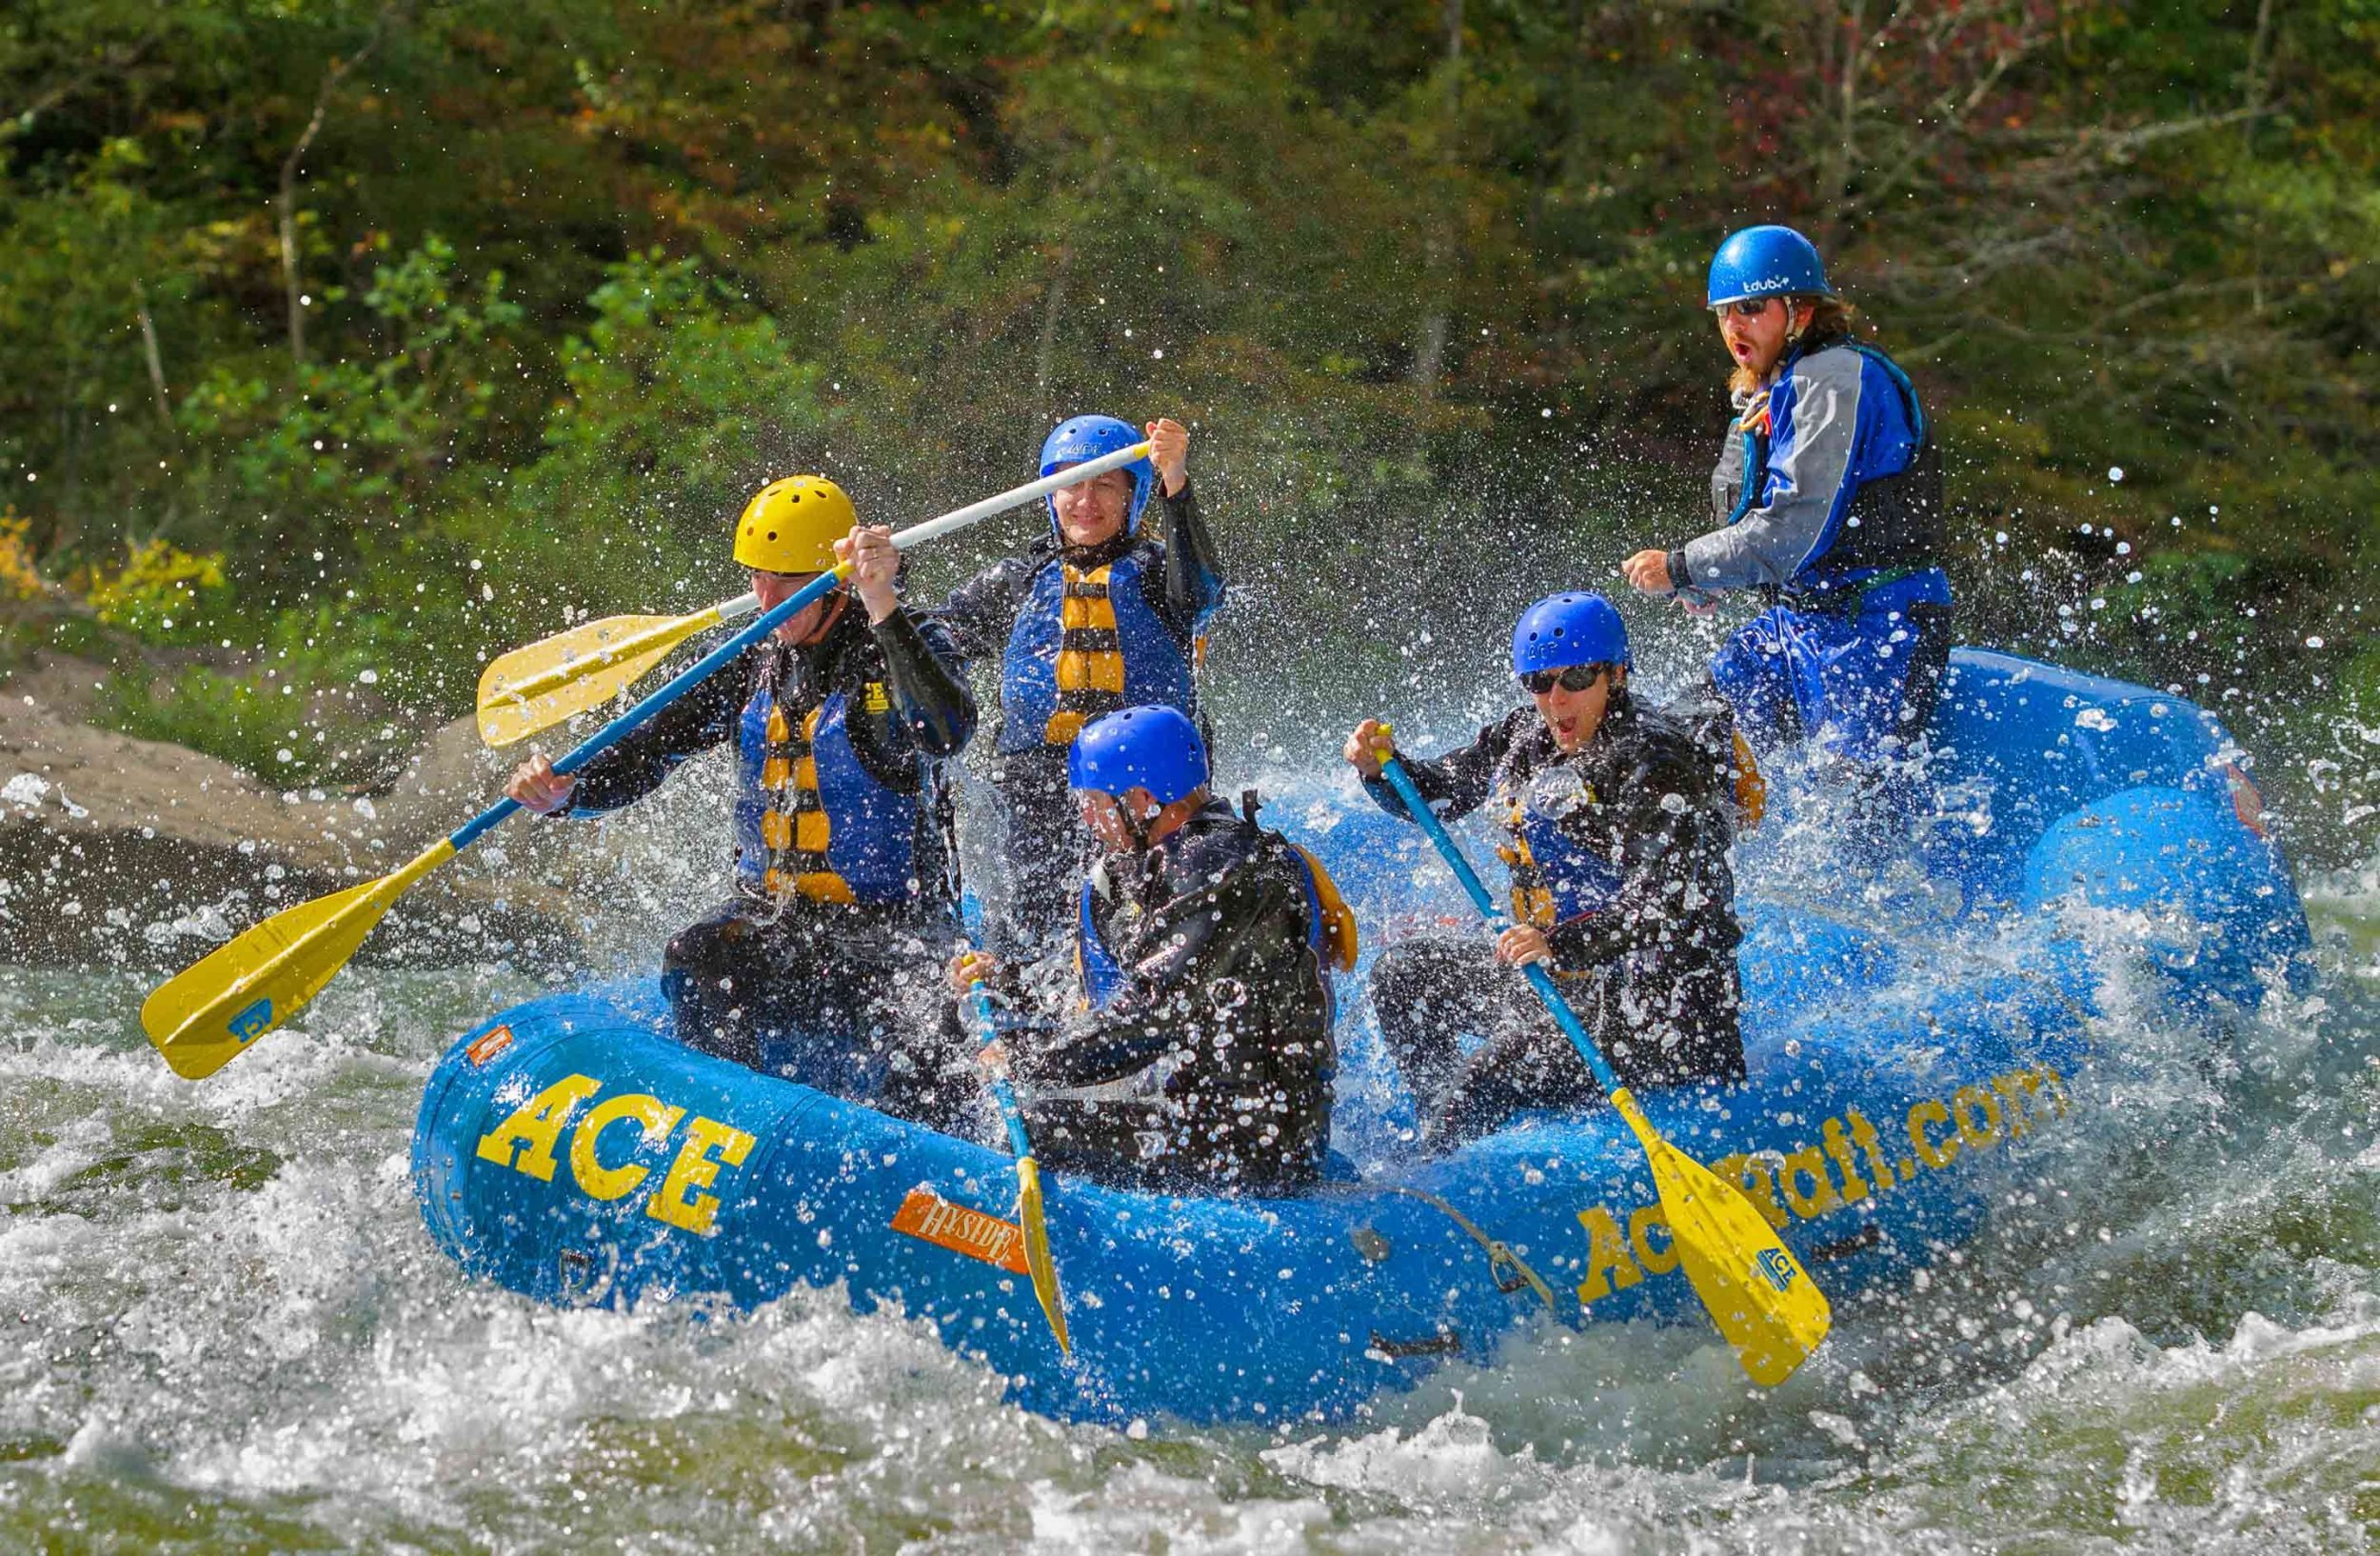 Fall Gauley: The Best White Water Rafting in the United States